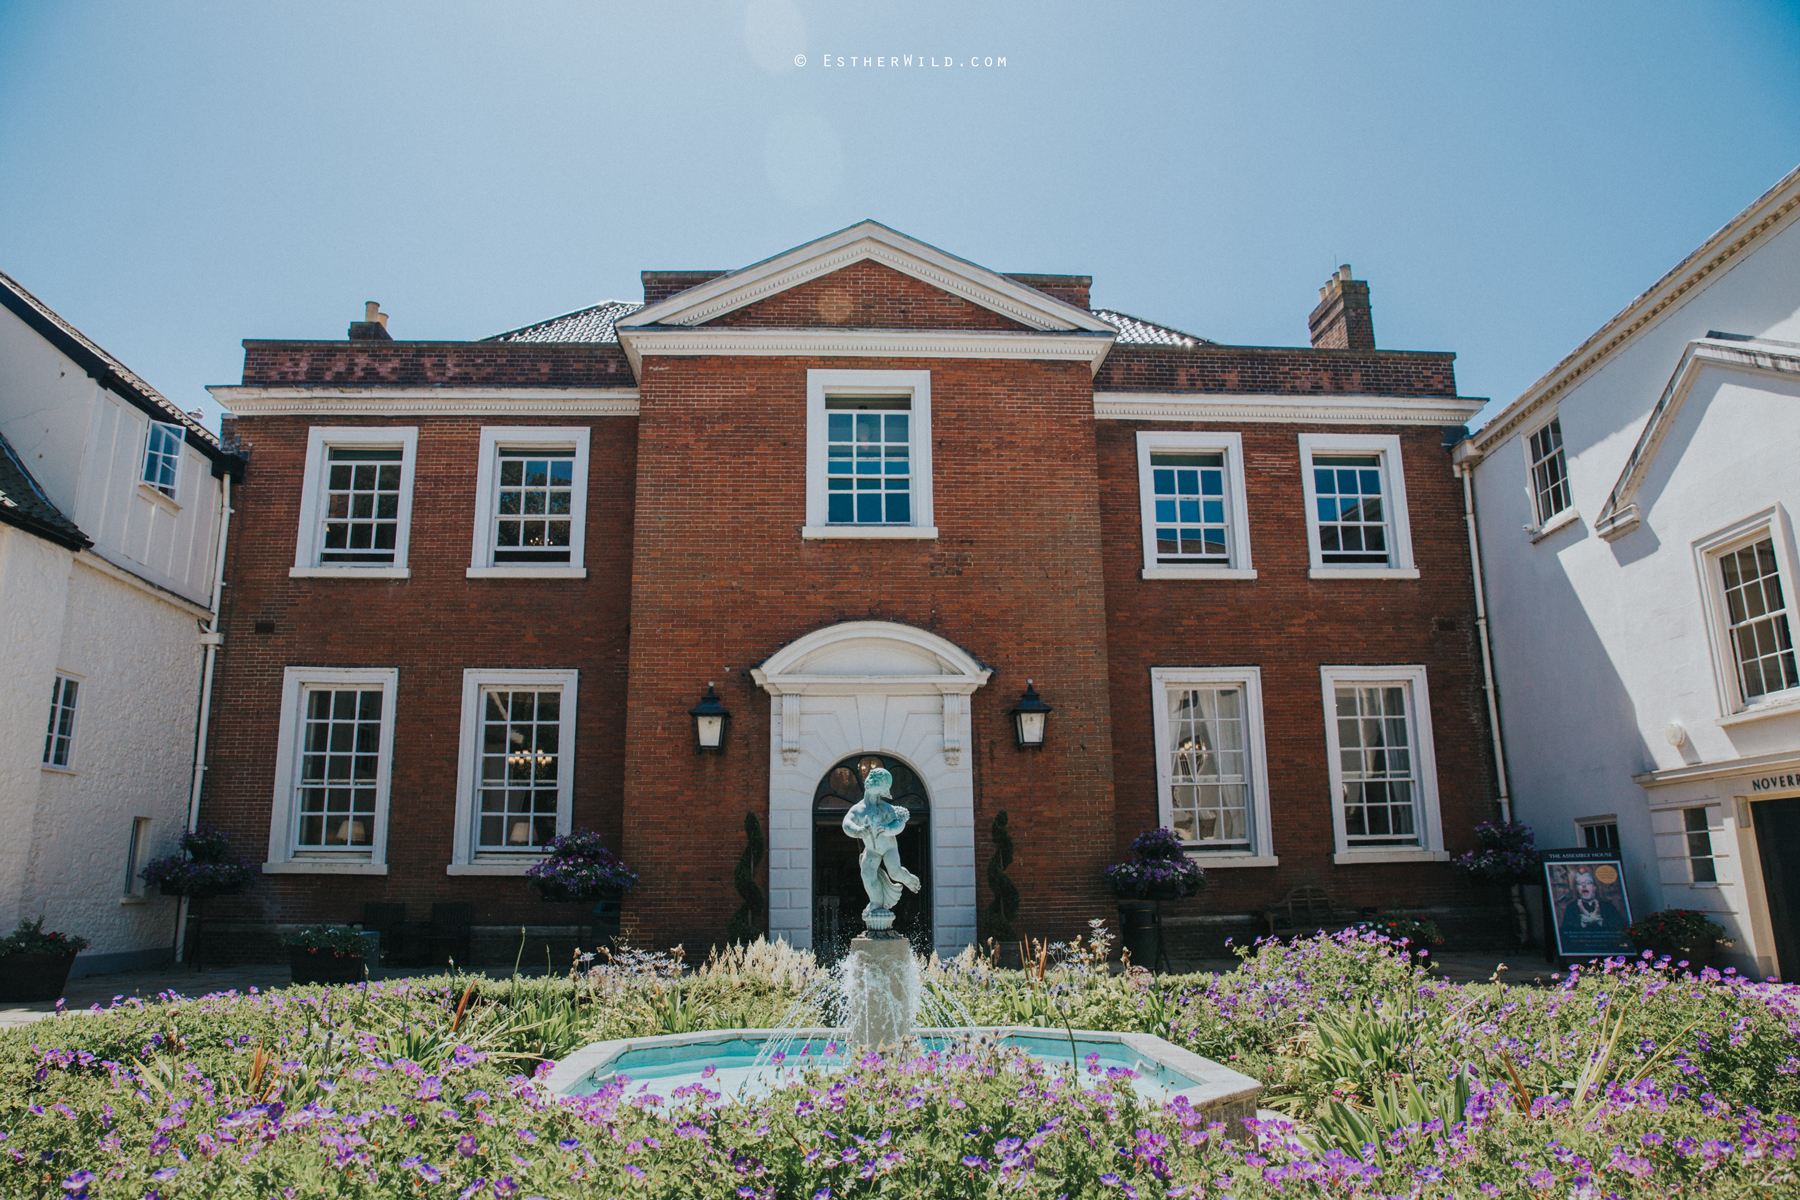 Assembly_House_Norwich_Norfolk_Esther_Wild_Photographer_IMG_0268.jpg